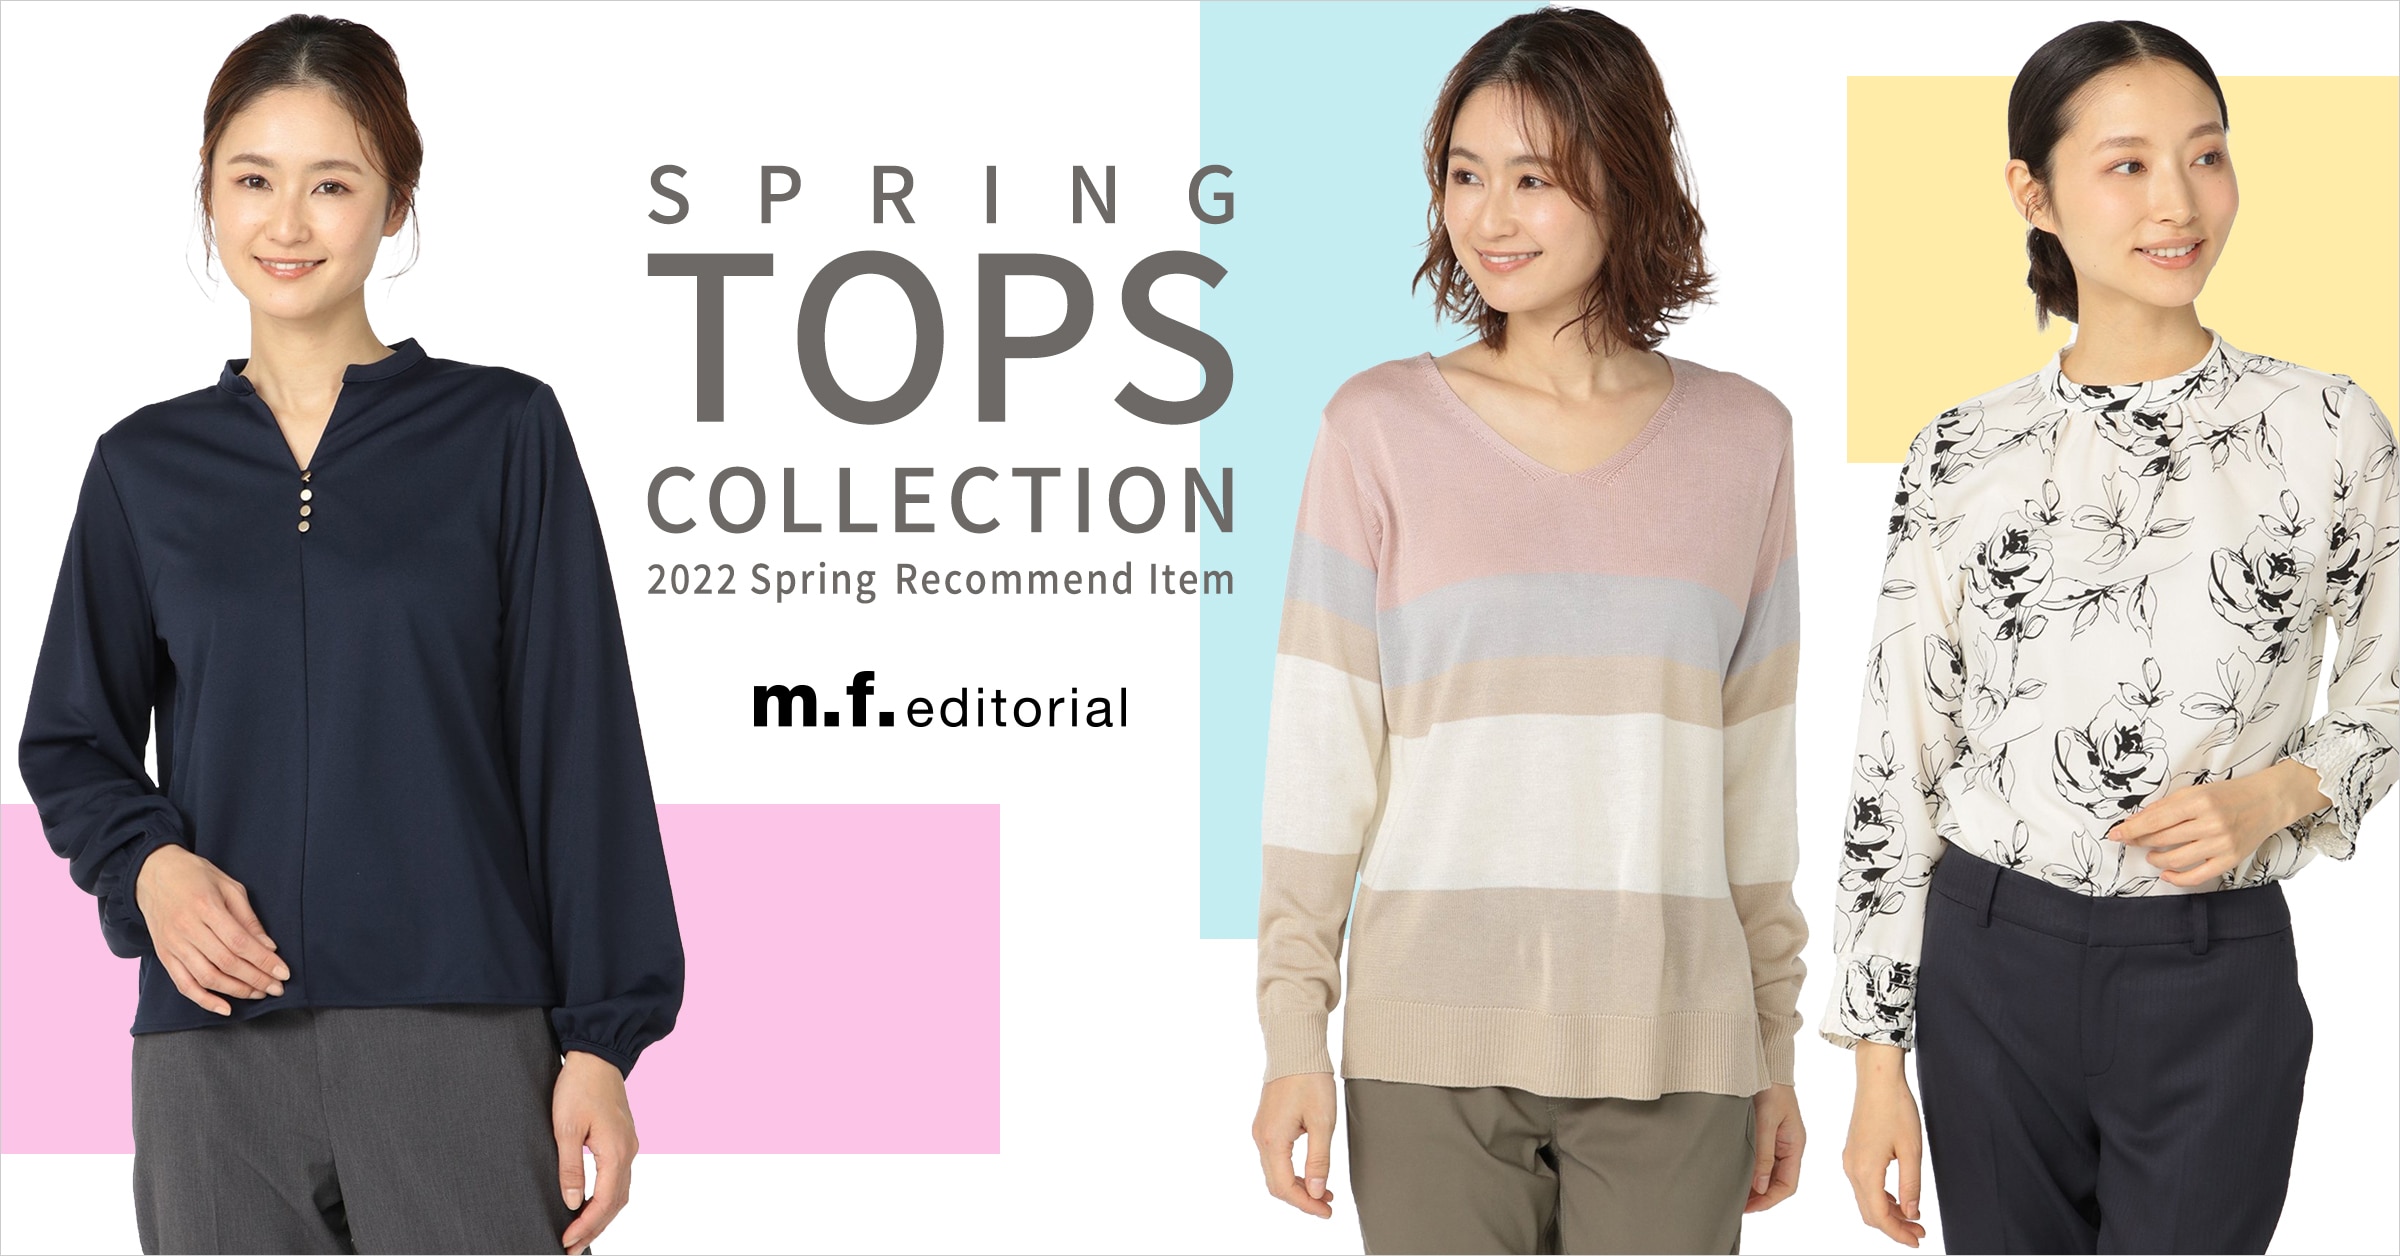 SPRING TOPS COLLECTION